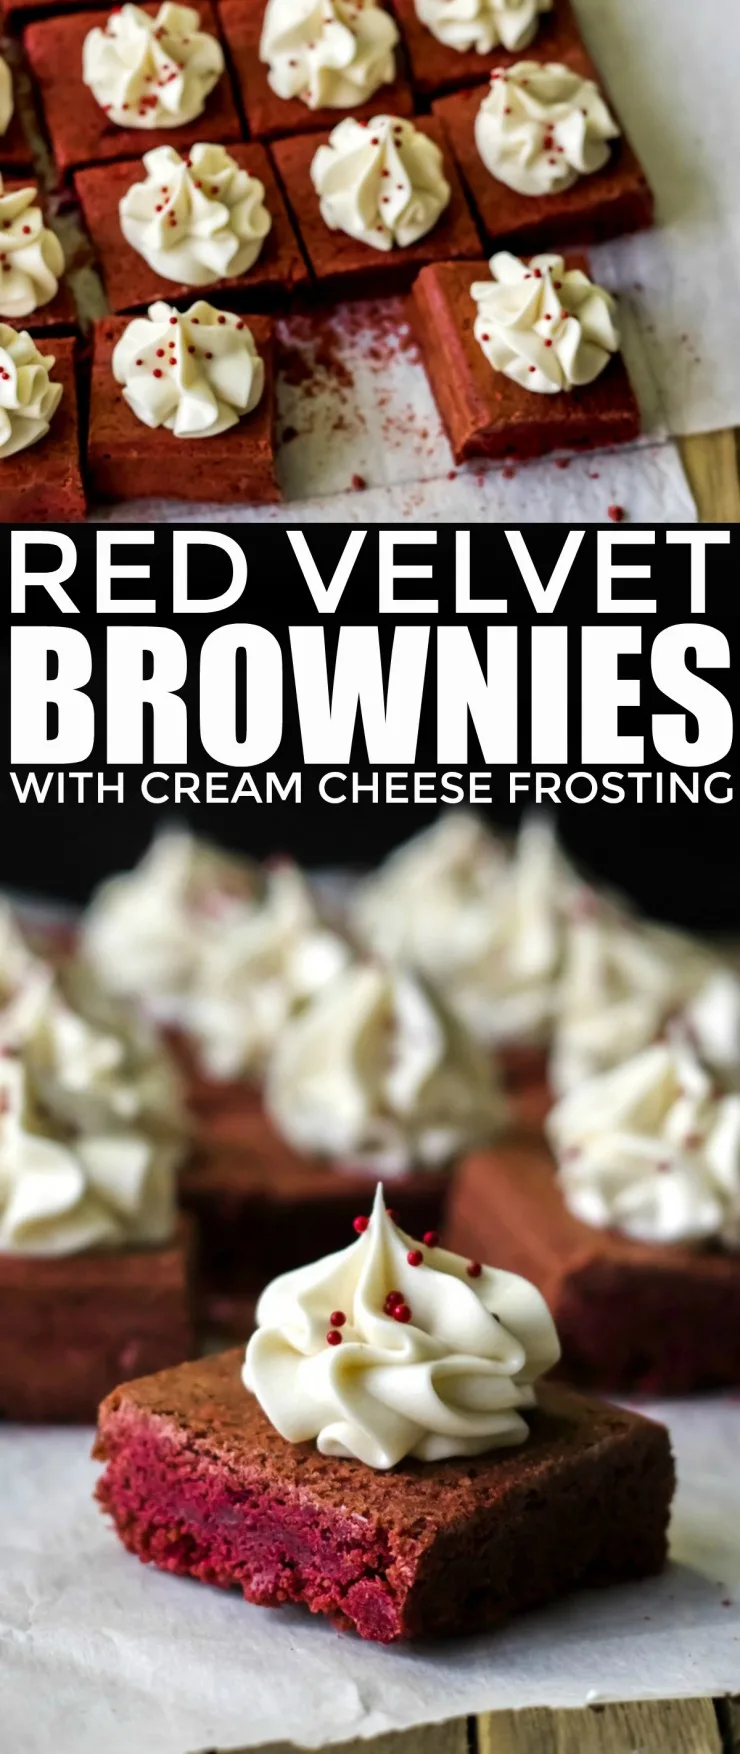 These Red Velvet Brownies with Cream Cheese Frosting combine the flavours of red velvet cake with a brownie to create an incredible brownie topped with a delectable cream cheese frosting.